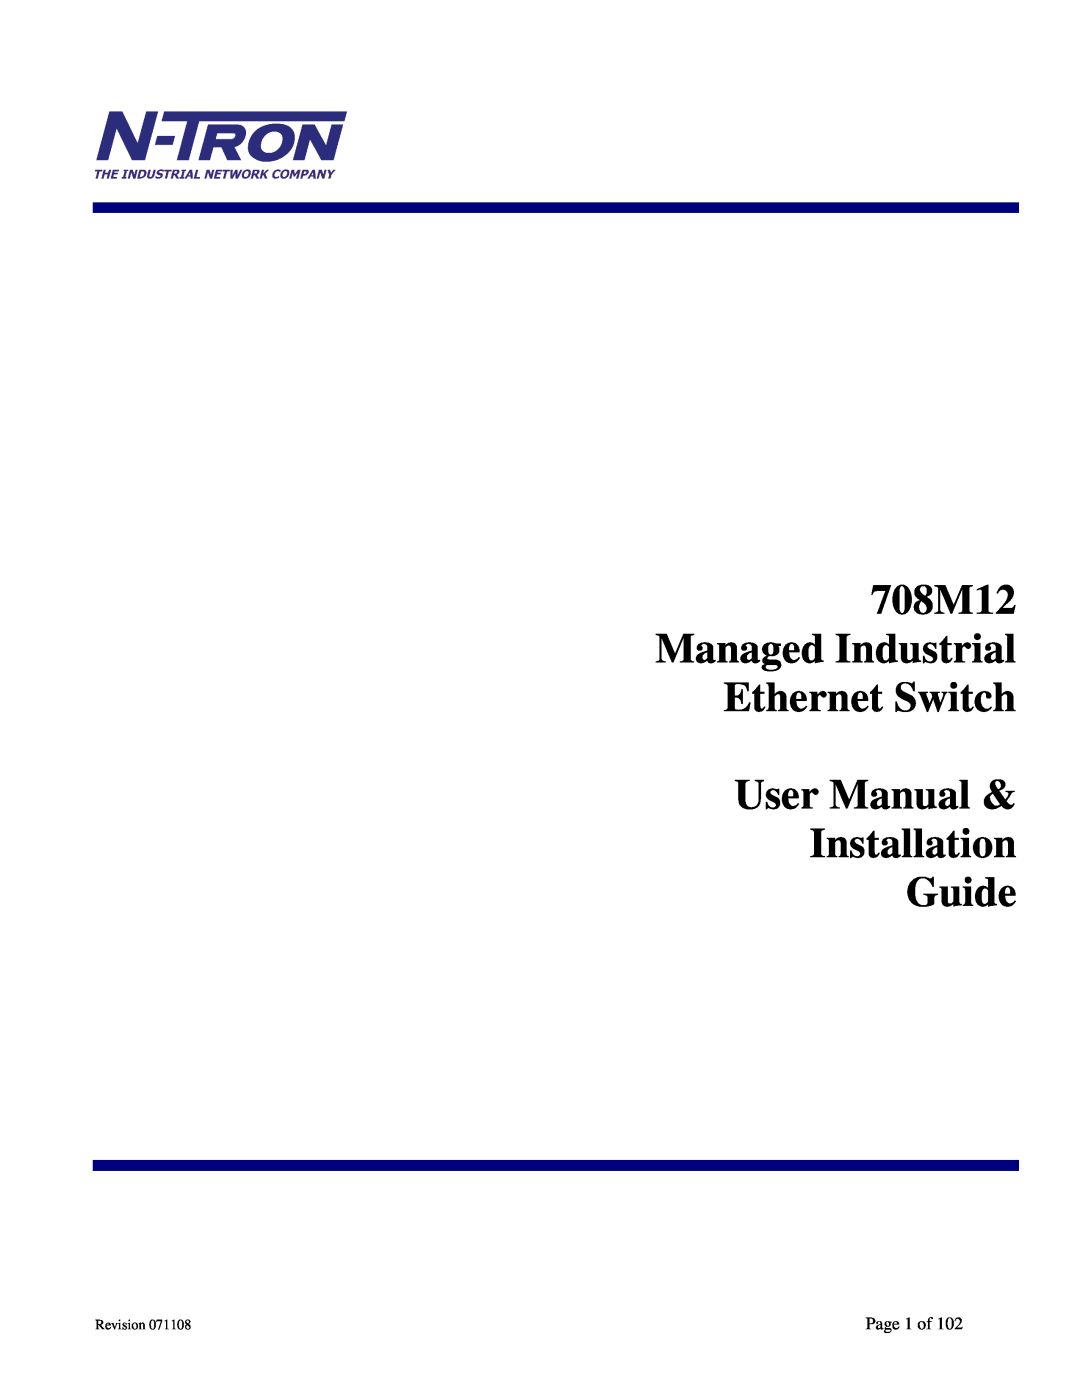 N-Tron 708M12 user manual Guide, Page 1 of, Revision 